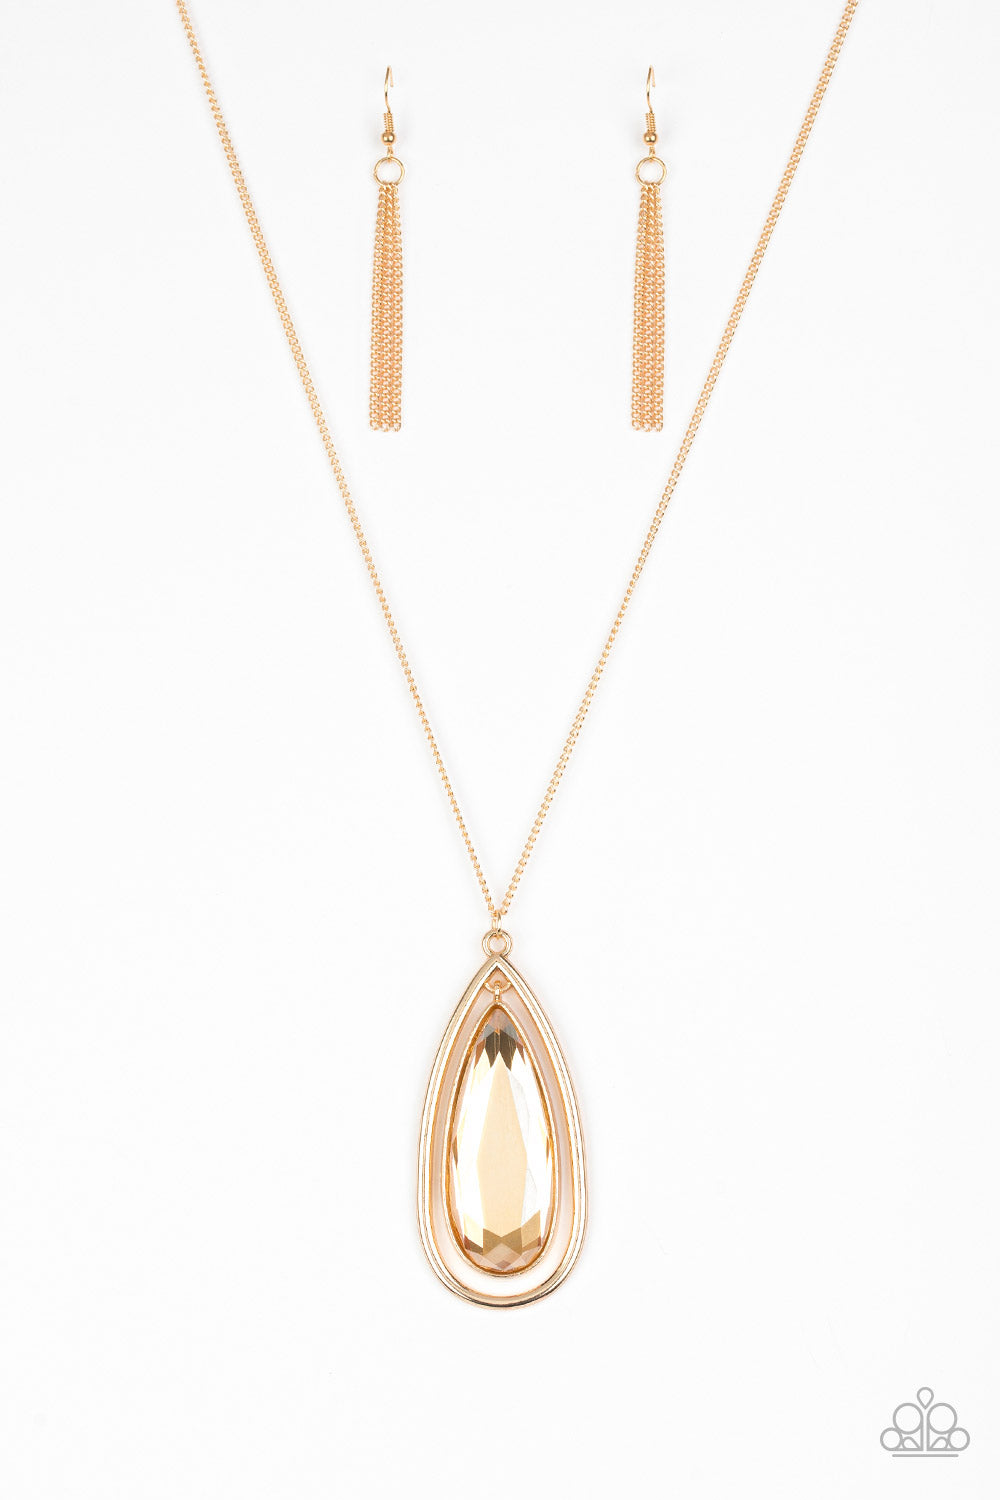 An oversized golden teardrop gem swings from the top of a glistening gold teardrop frame. The dramatic pendant swings from the bottom of an elegantly elongated gold chain for a regal finish. Features an adjustable clasp closure